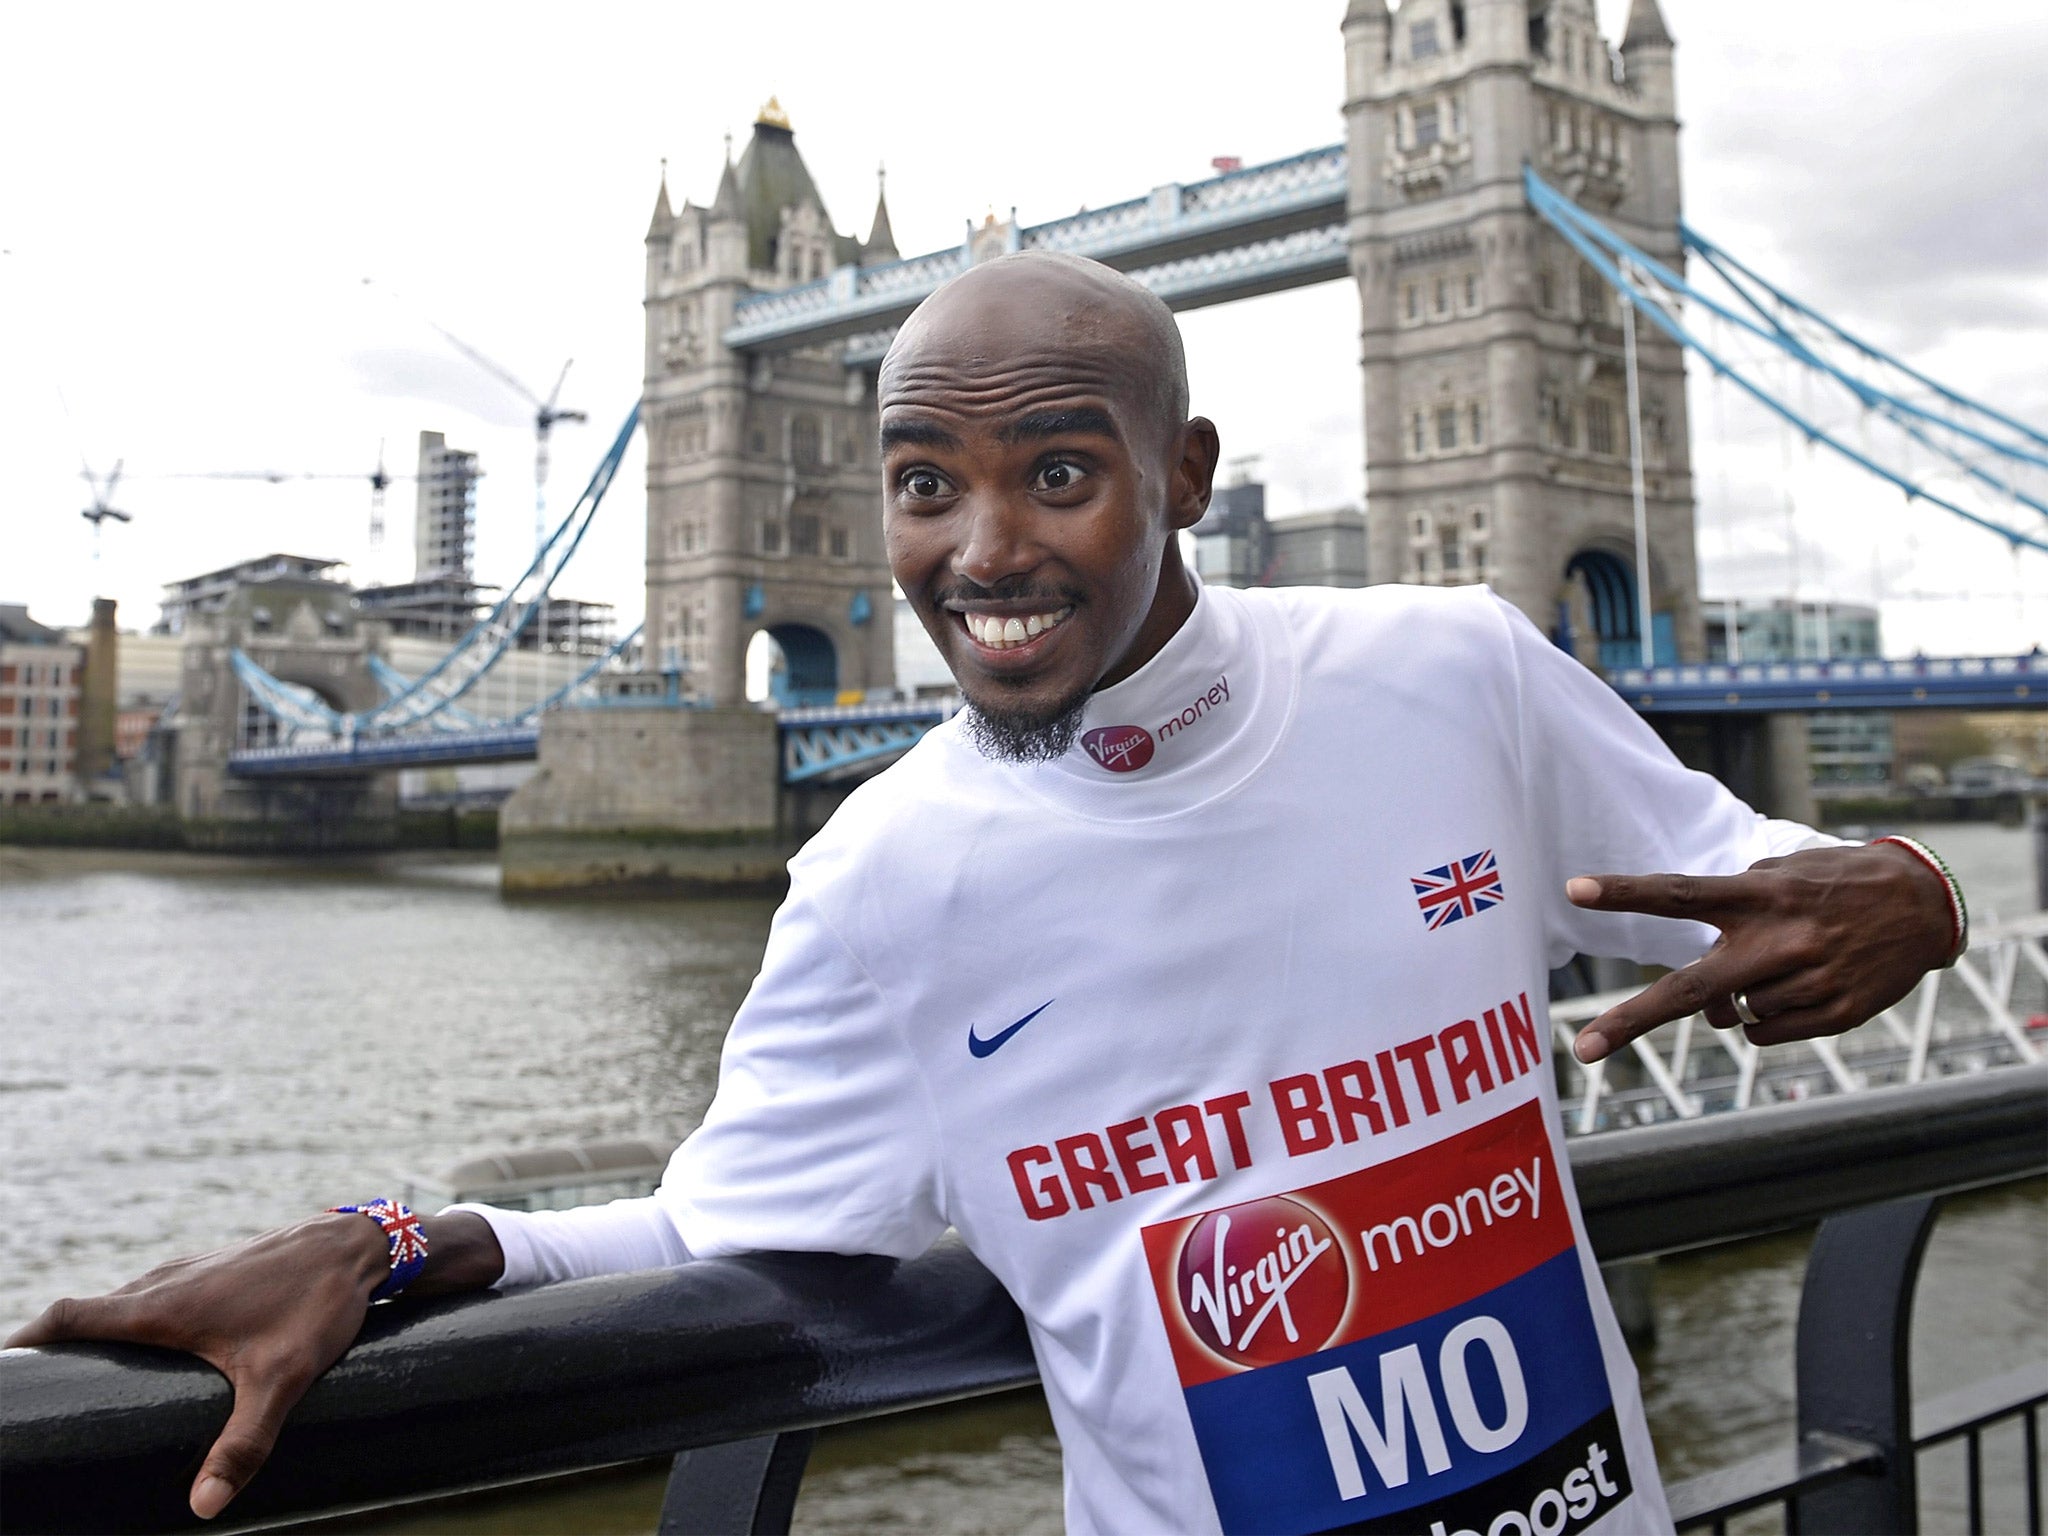 Double Olympic champion Mo Farah is upbeat about his attempt to win Sunday’s London Marathon